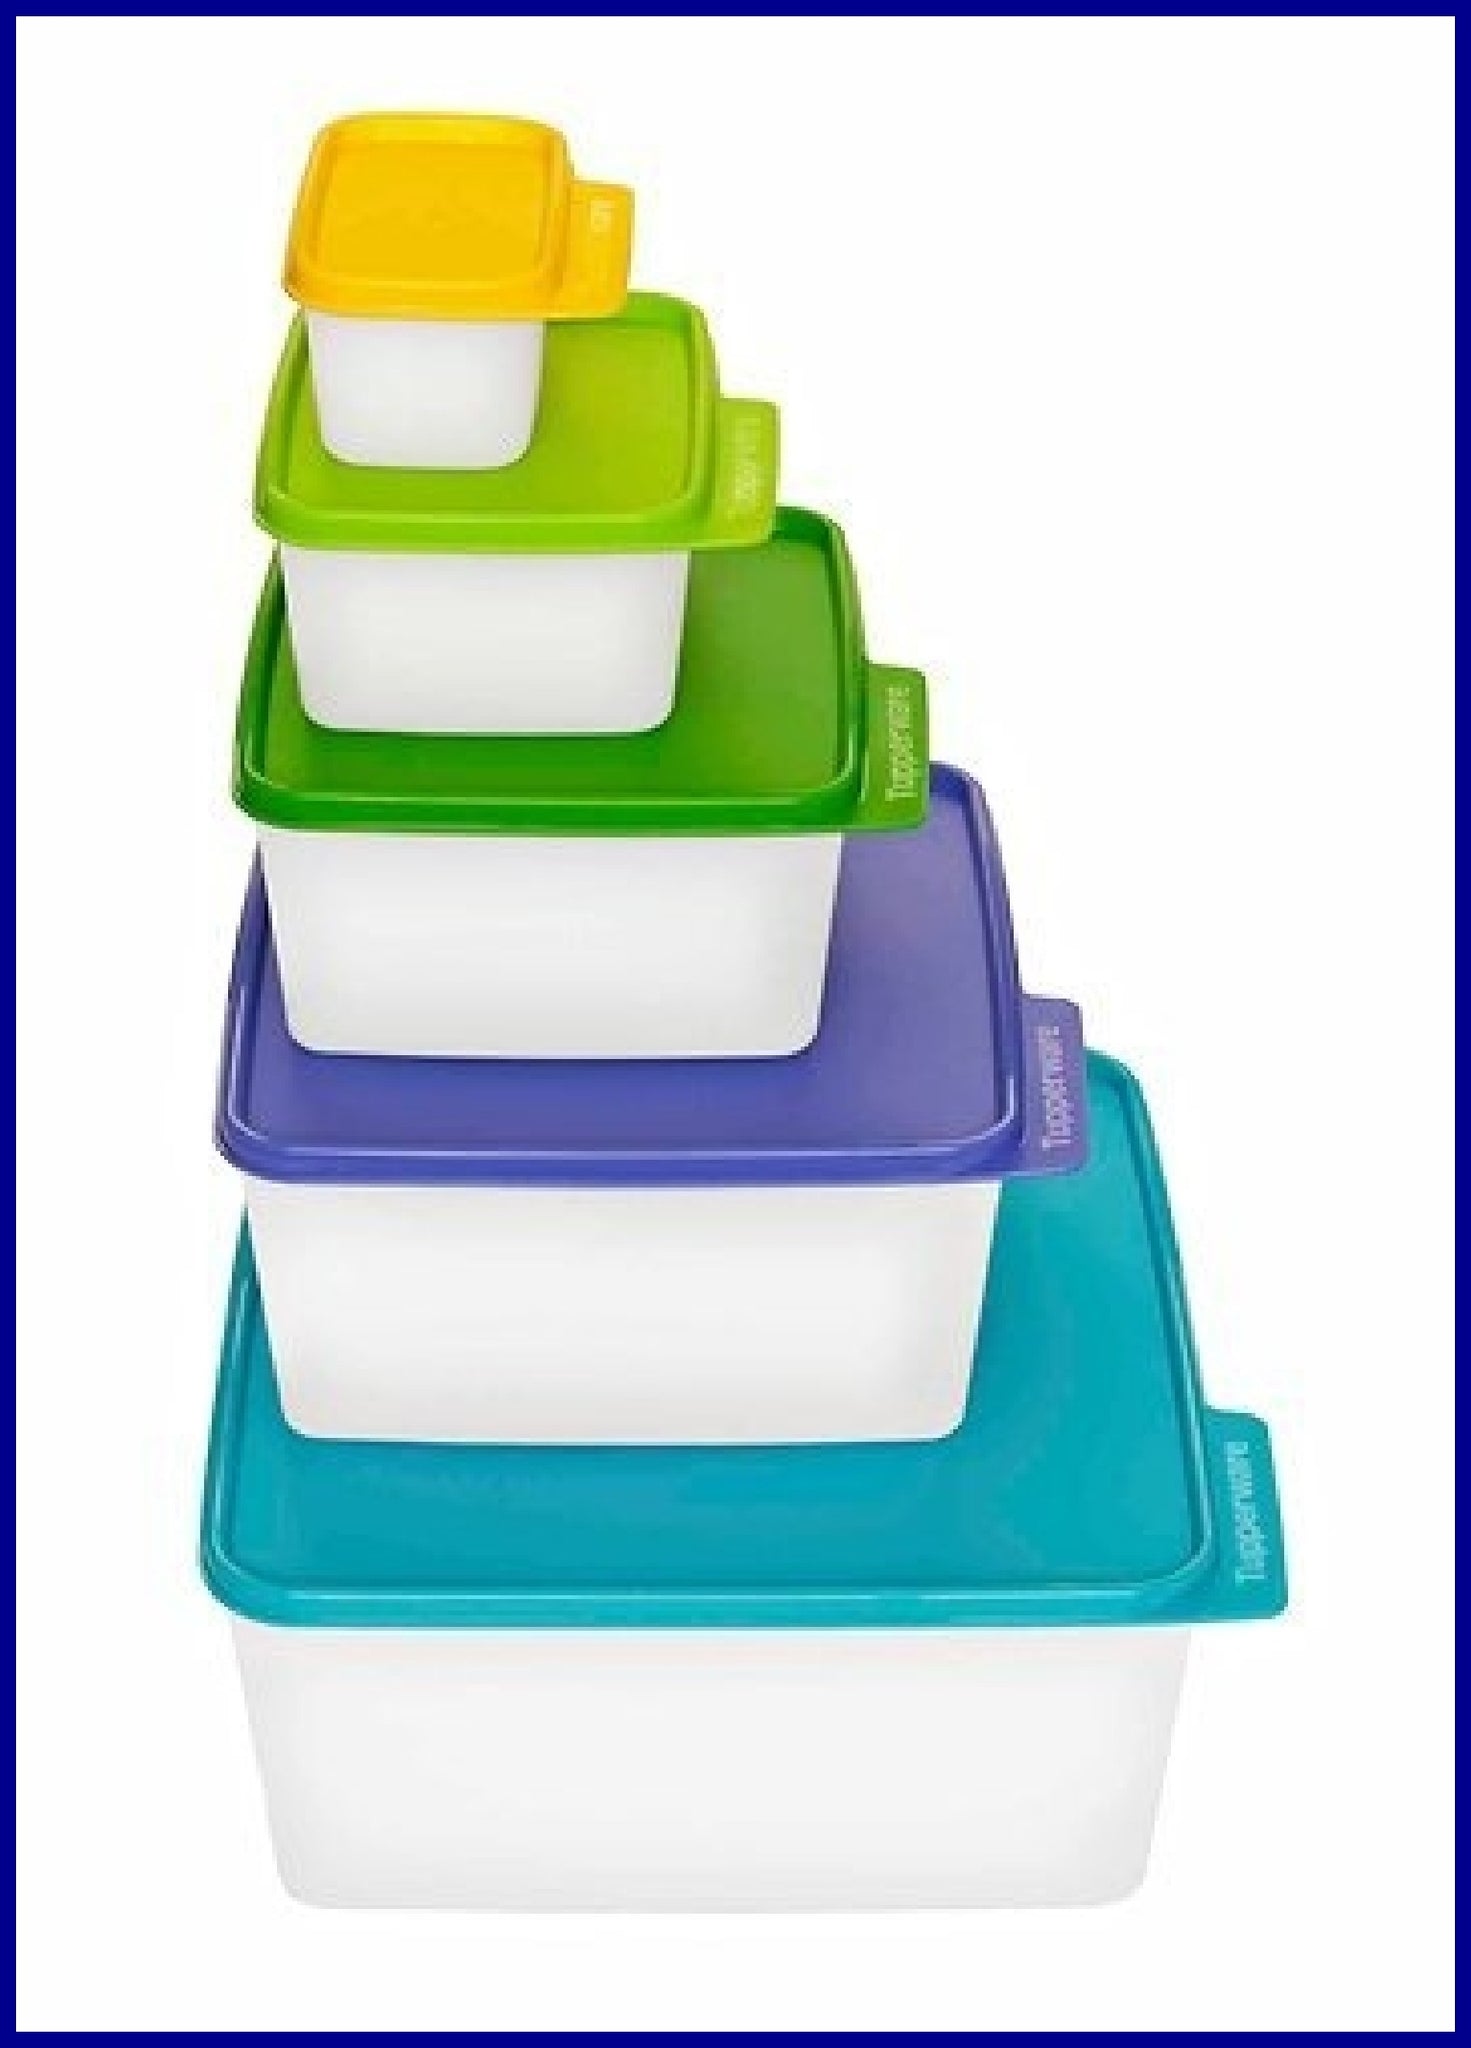 TUPPERWARE KEEP TABS 5-PC SET SQUARE STORAGE CONTAINERS w/ ORIGINAL COLORED TABBED SEALS